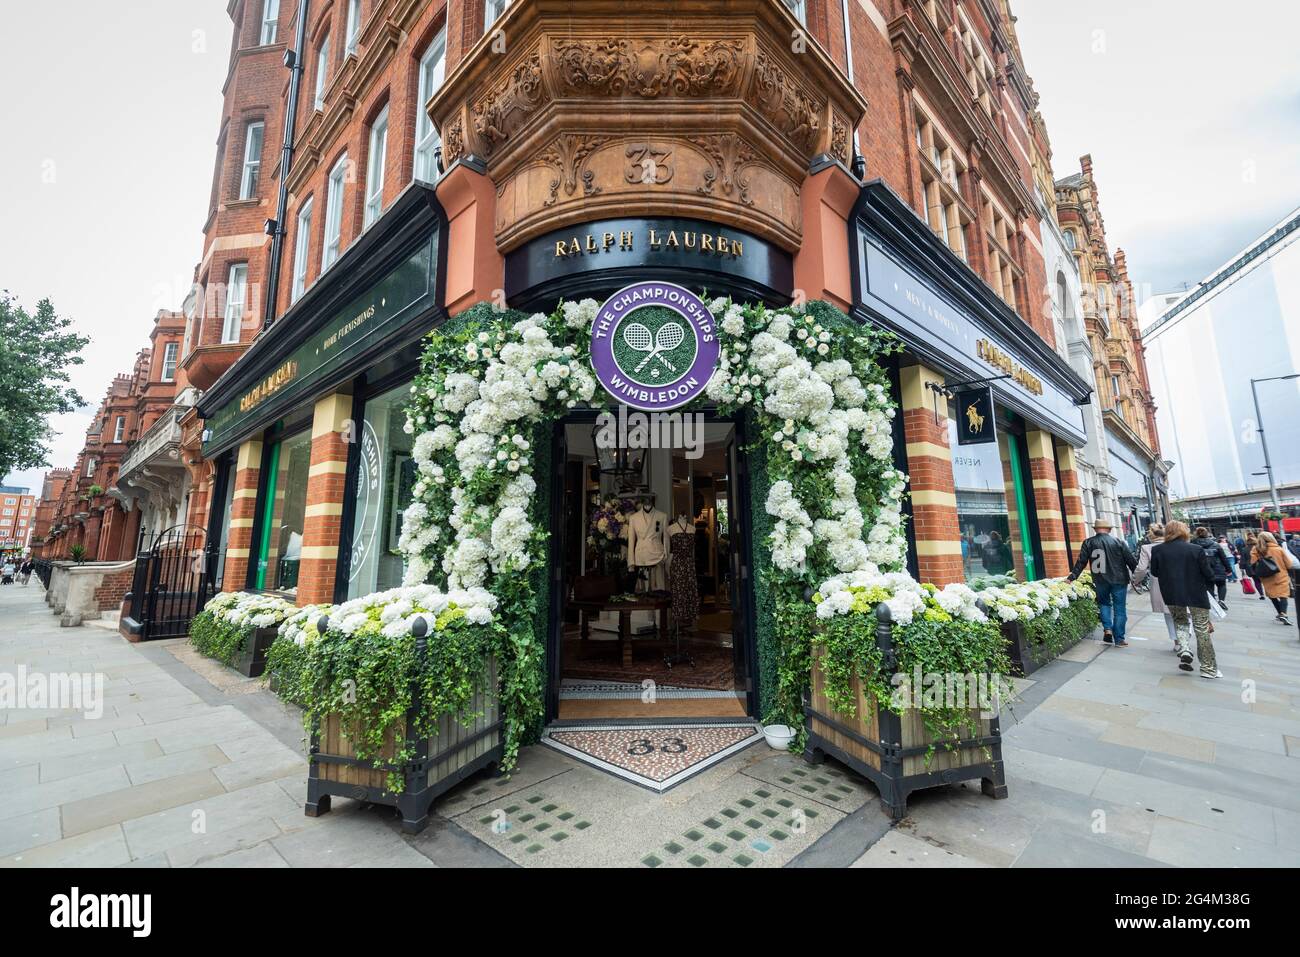 London, UK.  22 June 2021.  The exterior of the Ralph Lauren store in Sloane Square, decorated ahead of this year’s upcoming Wimbledon tennis championships at the All England club. Ralph Lauren supplies outfits for officials at the event.  Lockdown restrictions will limit crowds, but the finals will be at full capacity when restrictions are relaxed.  Credit: Stephen Chung / Alamy Live News Stock Photo